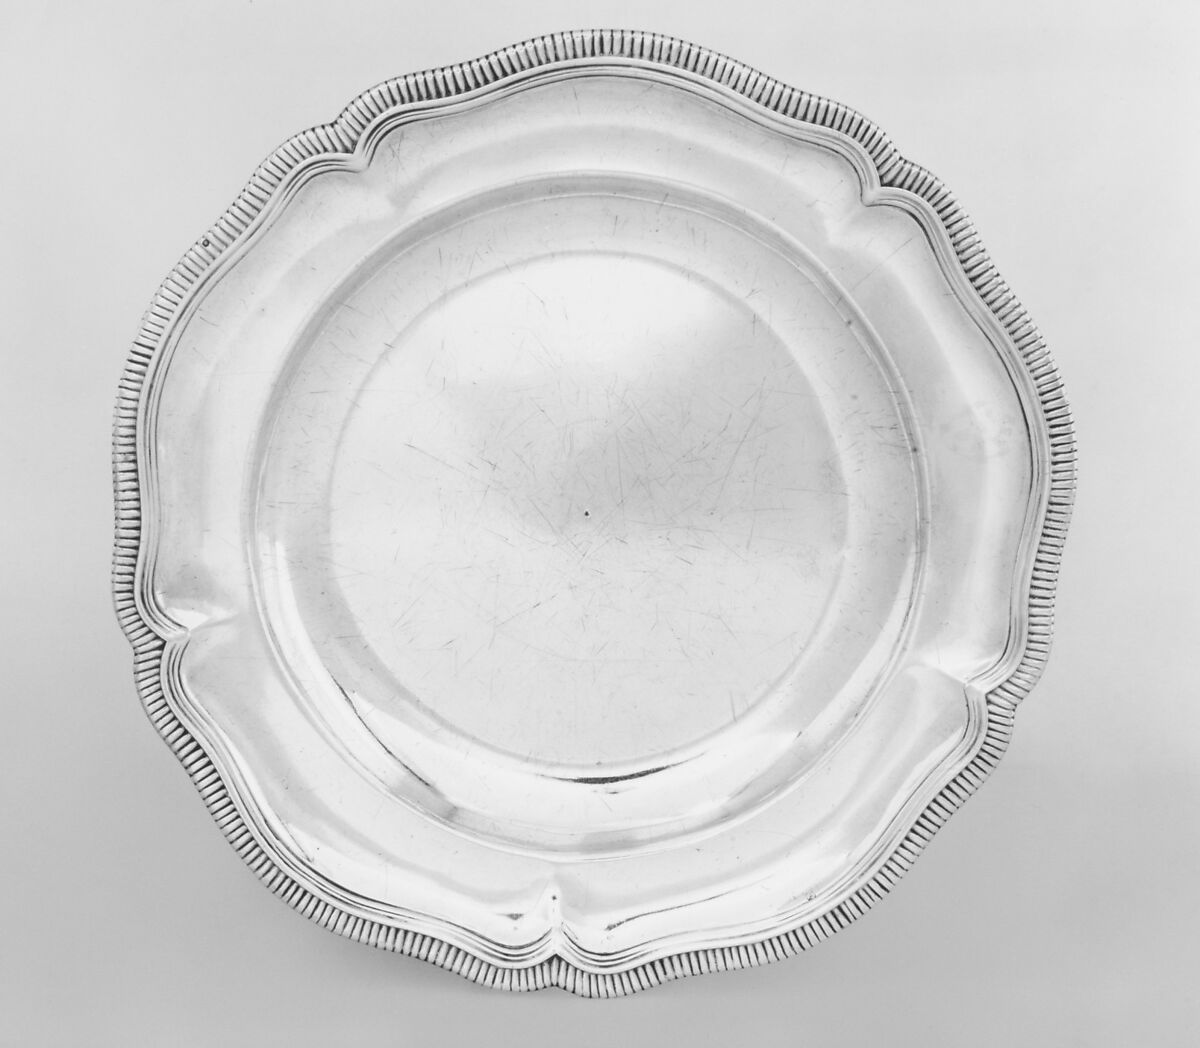 Plate, Alexis Micalef (master 1756, transferred to Lyons 1773, active Lyons 1788), Silver, French, Paris 